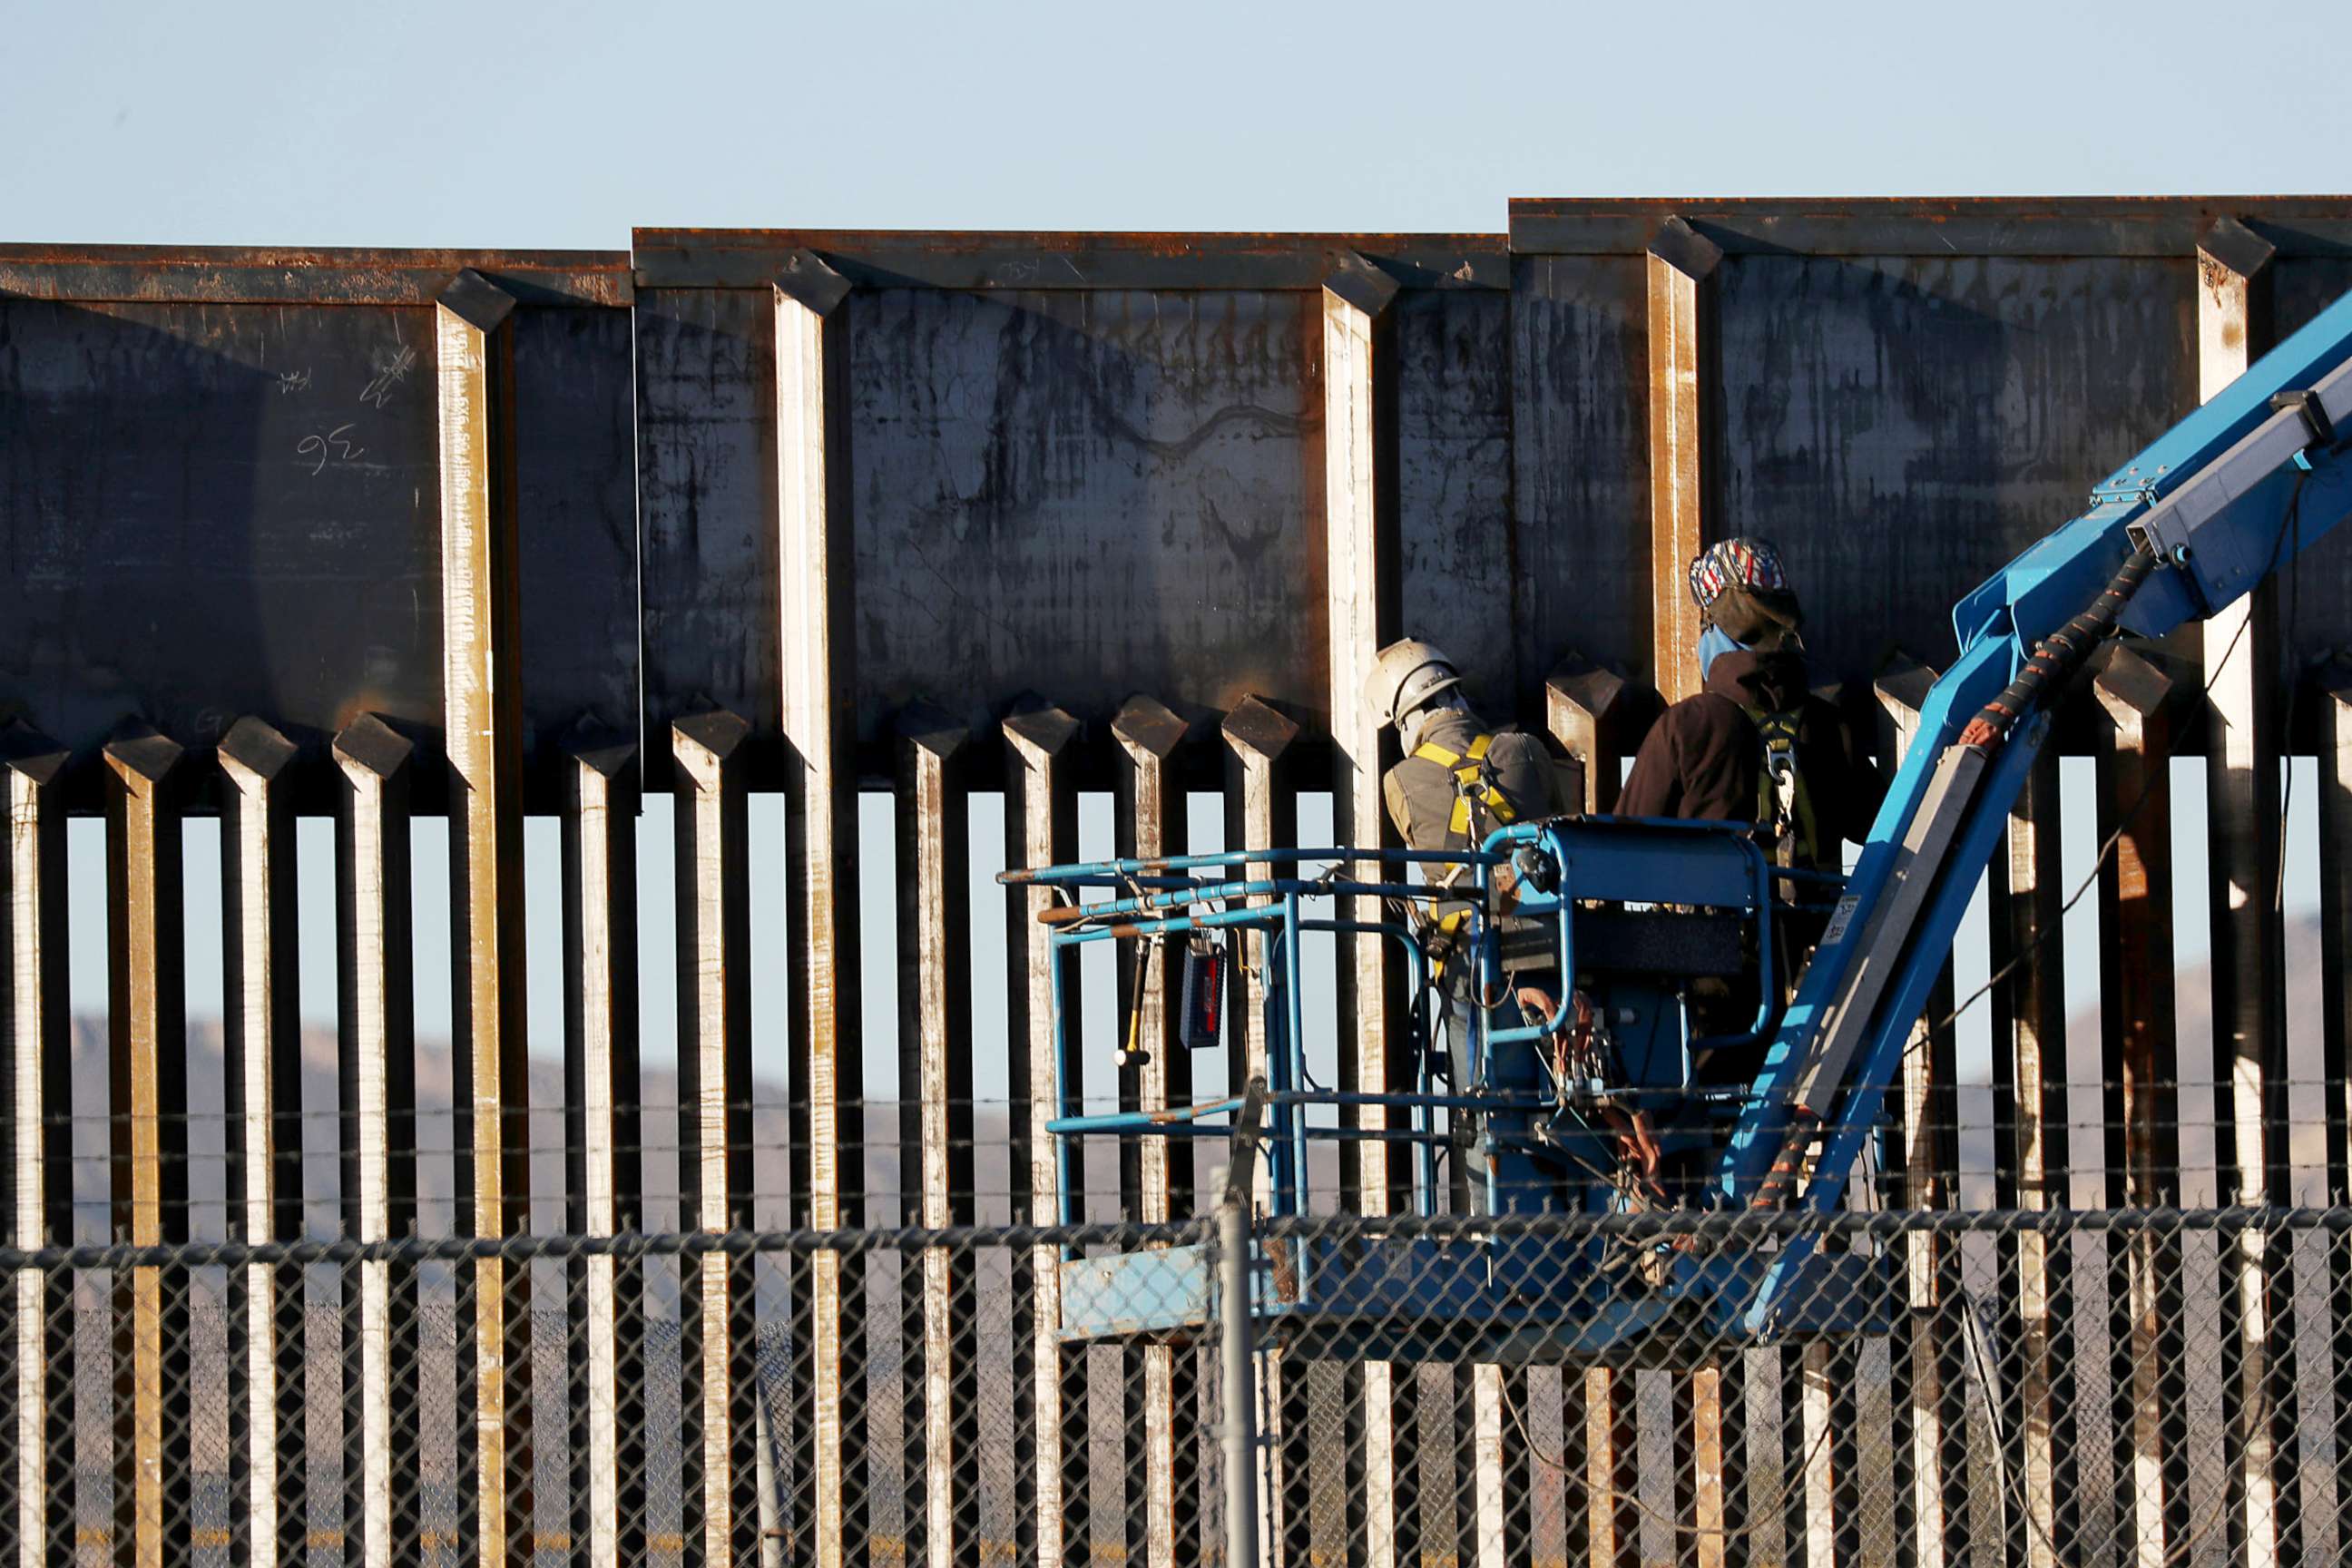 PHOTO: People work on the U.S./Mexican border wall, Feb. 12, 2019, in El Paso, Texas.